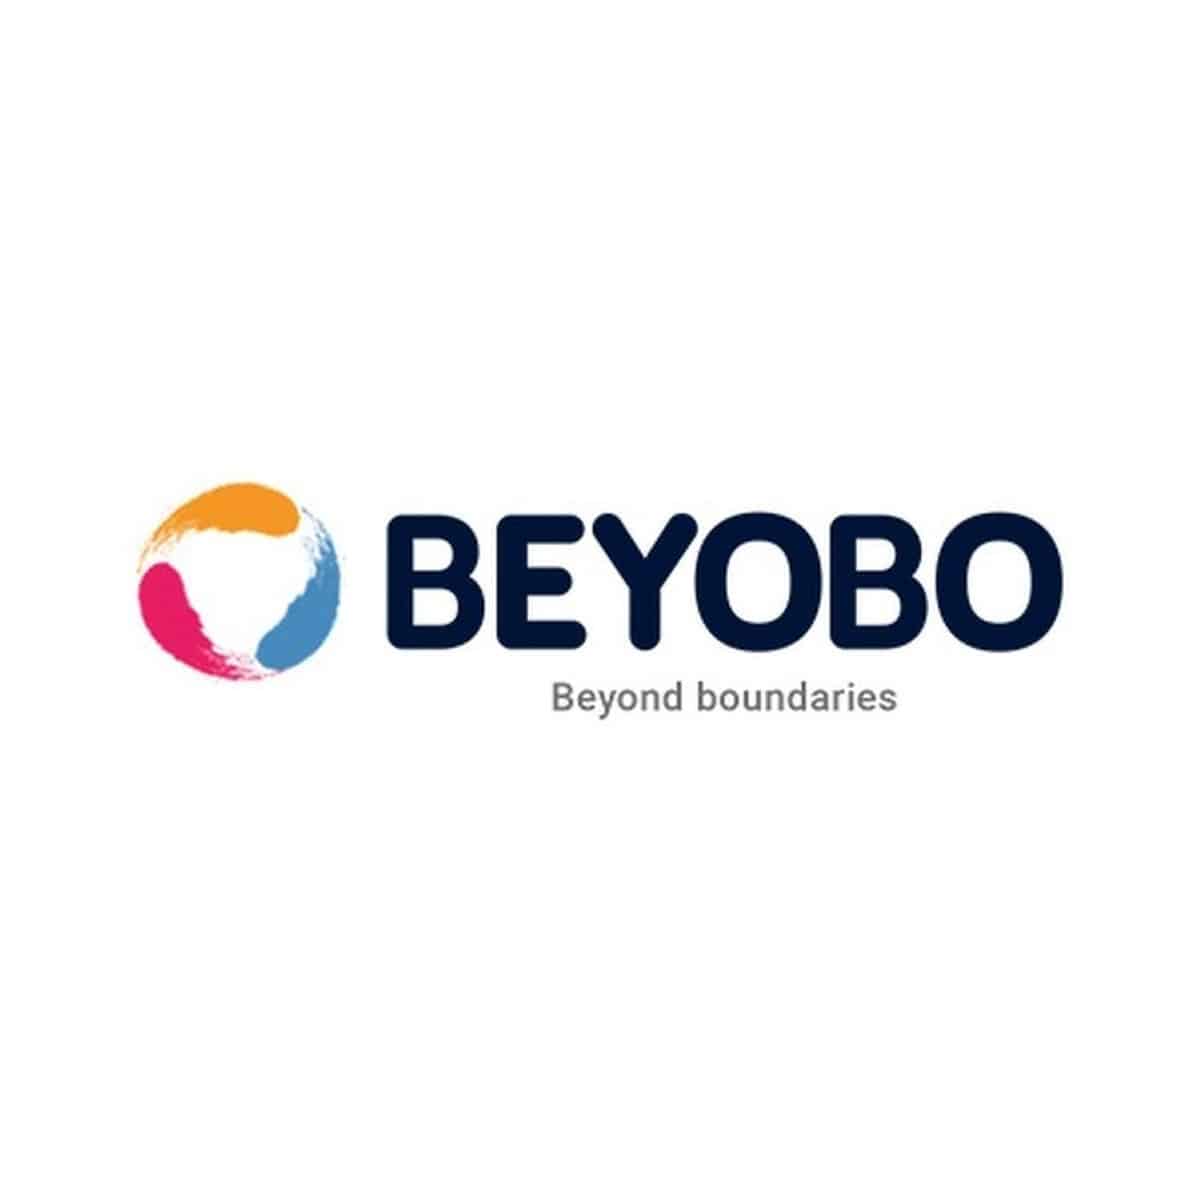 Beyobo raises ~Rs 5.5 Crores in Pre-Series A Round led by IPV 1